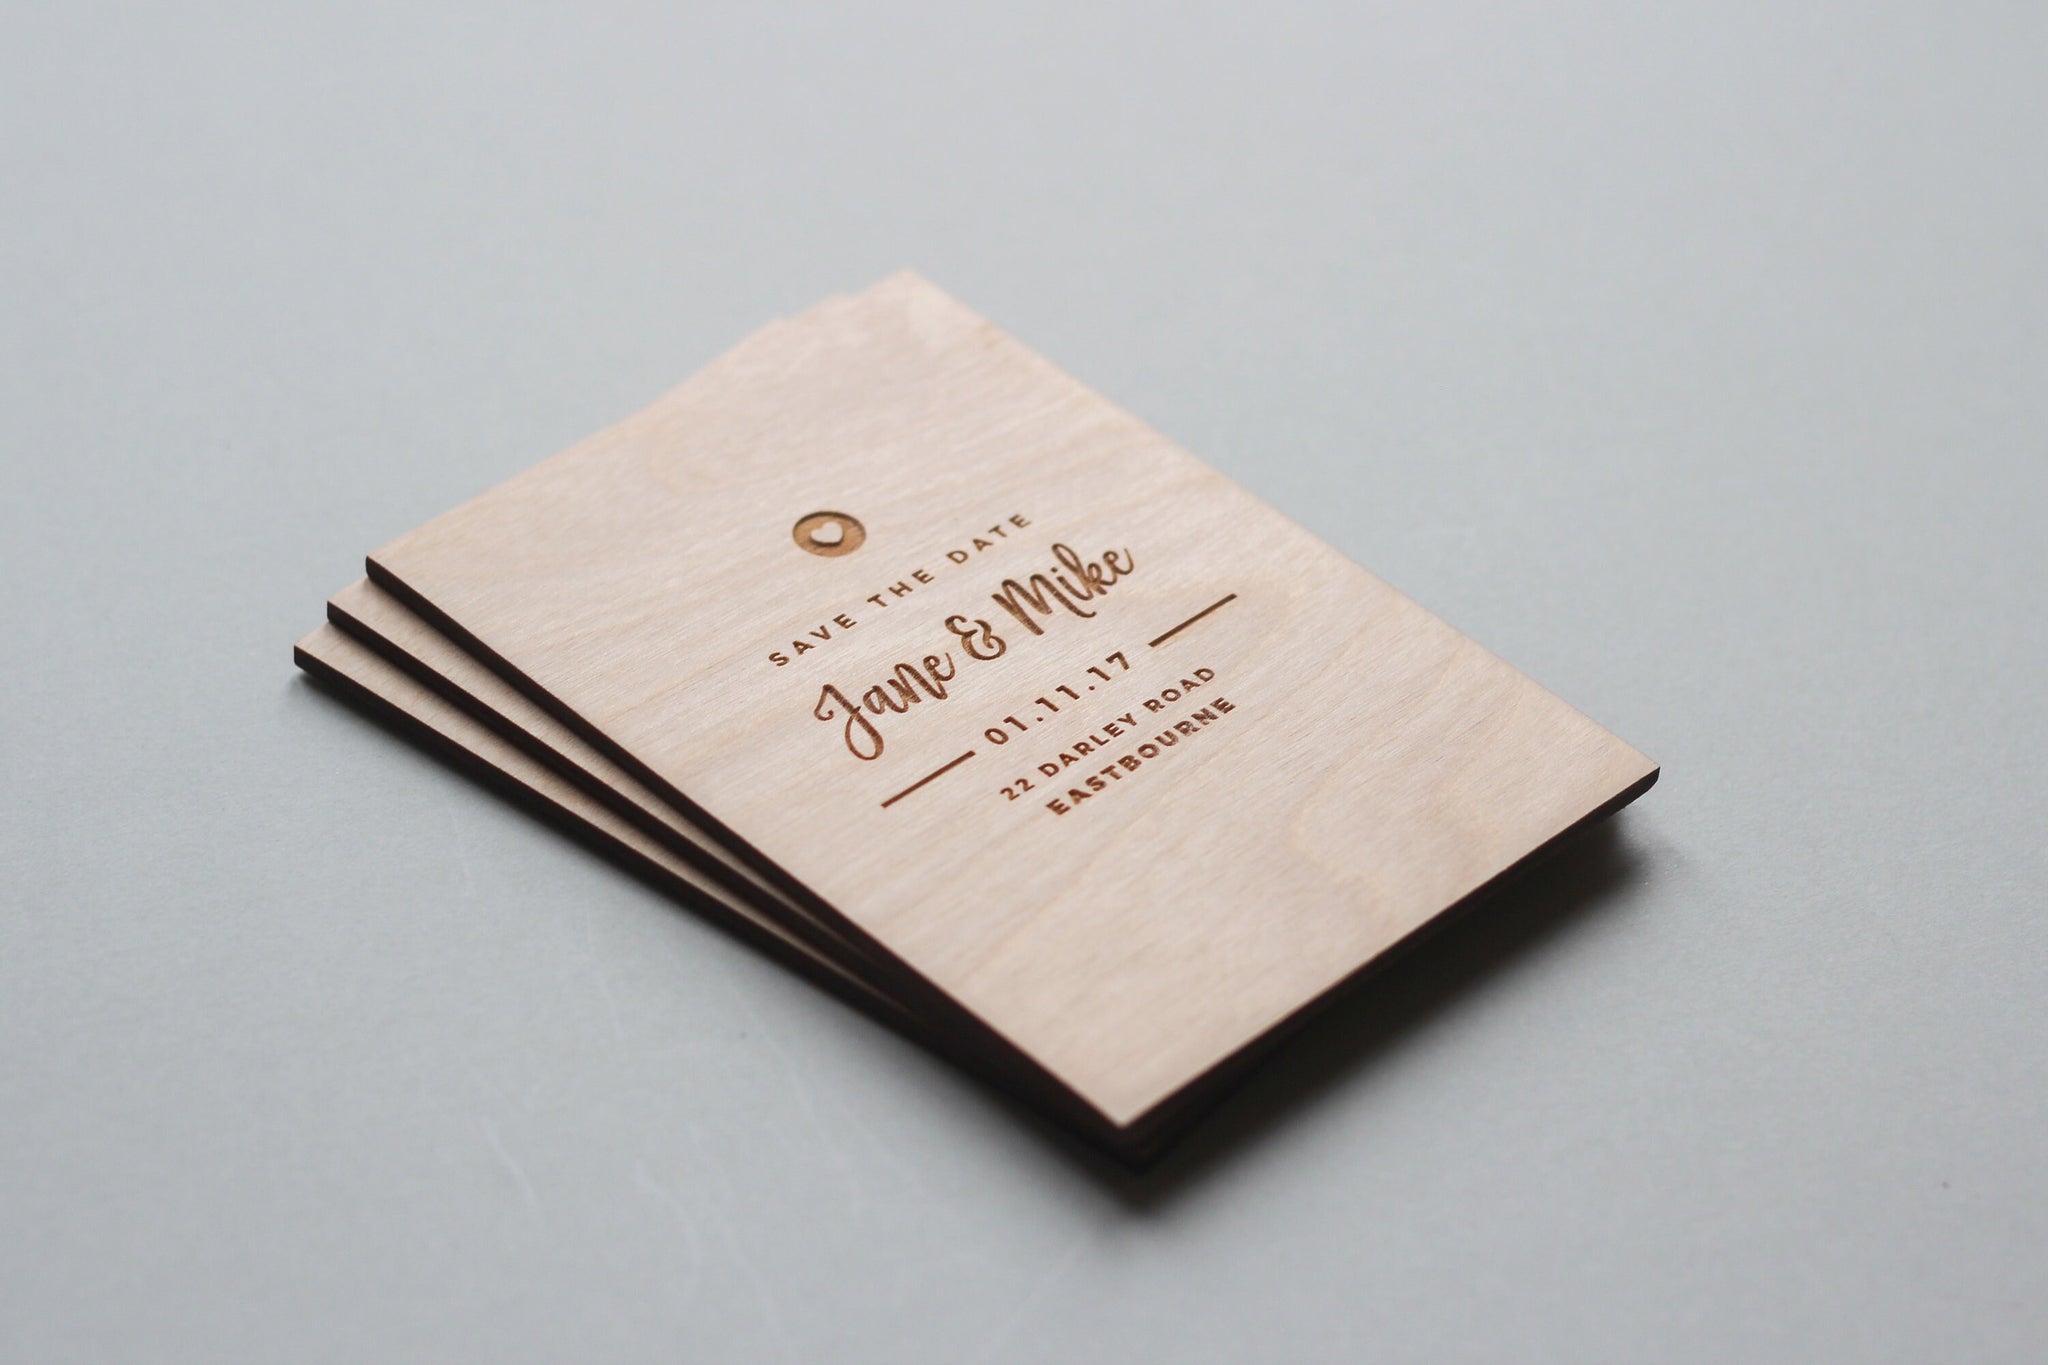 Wooden Save The Date Card, Save The Date Wood